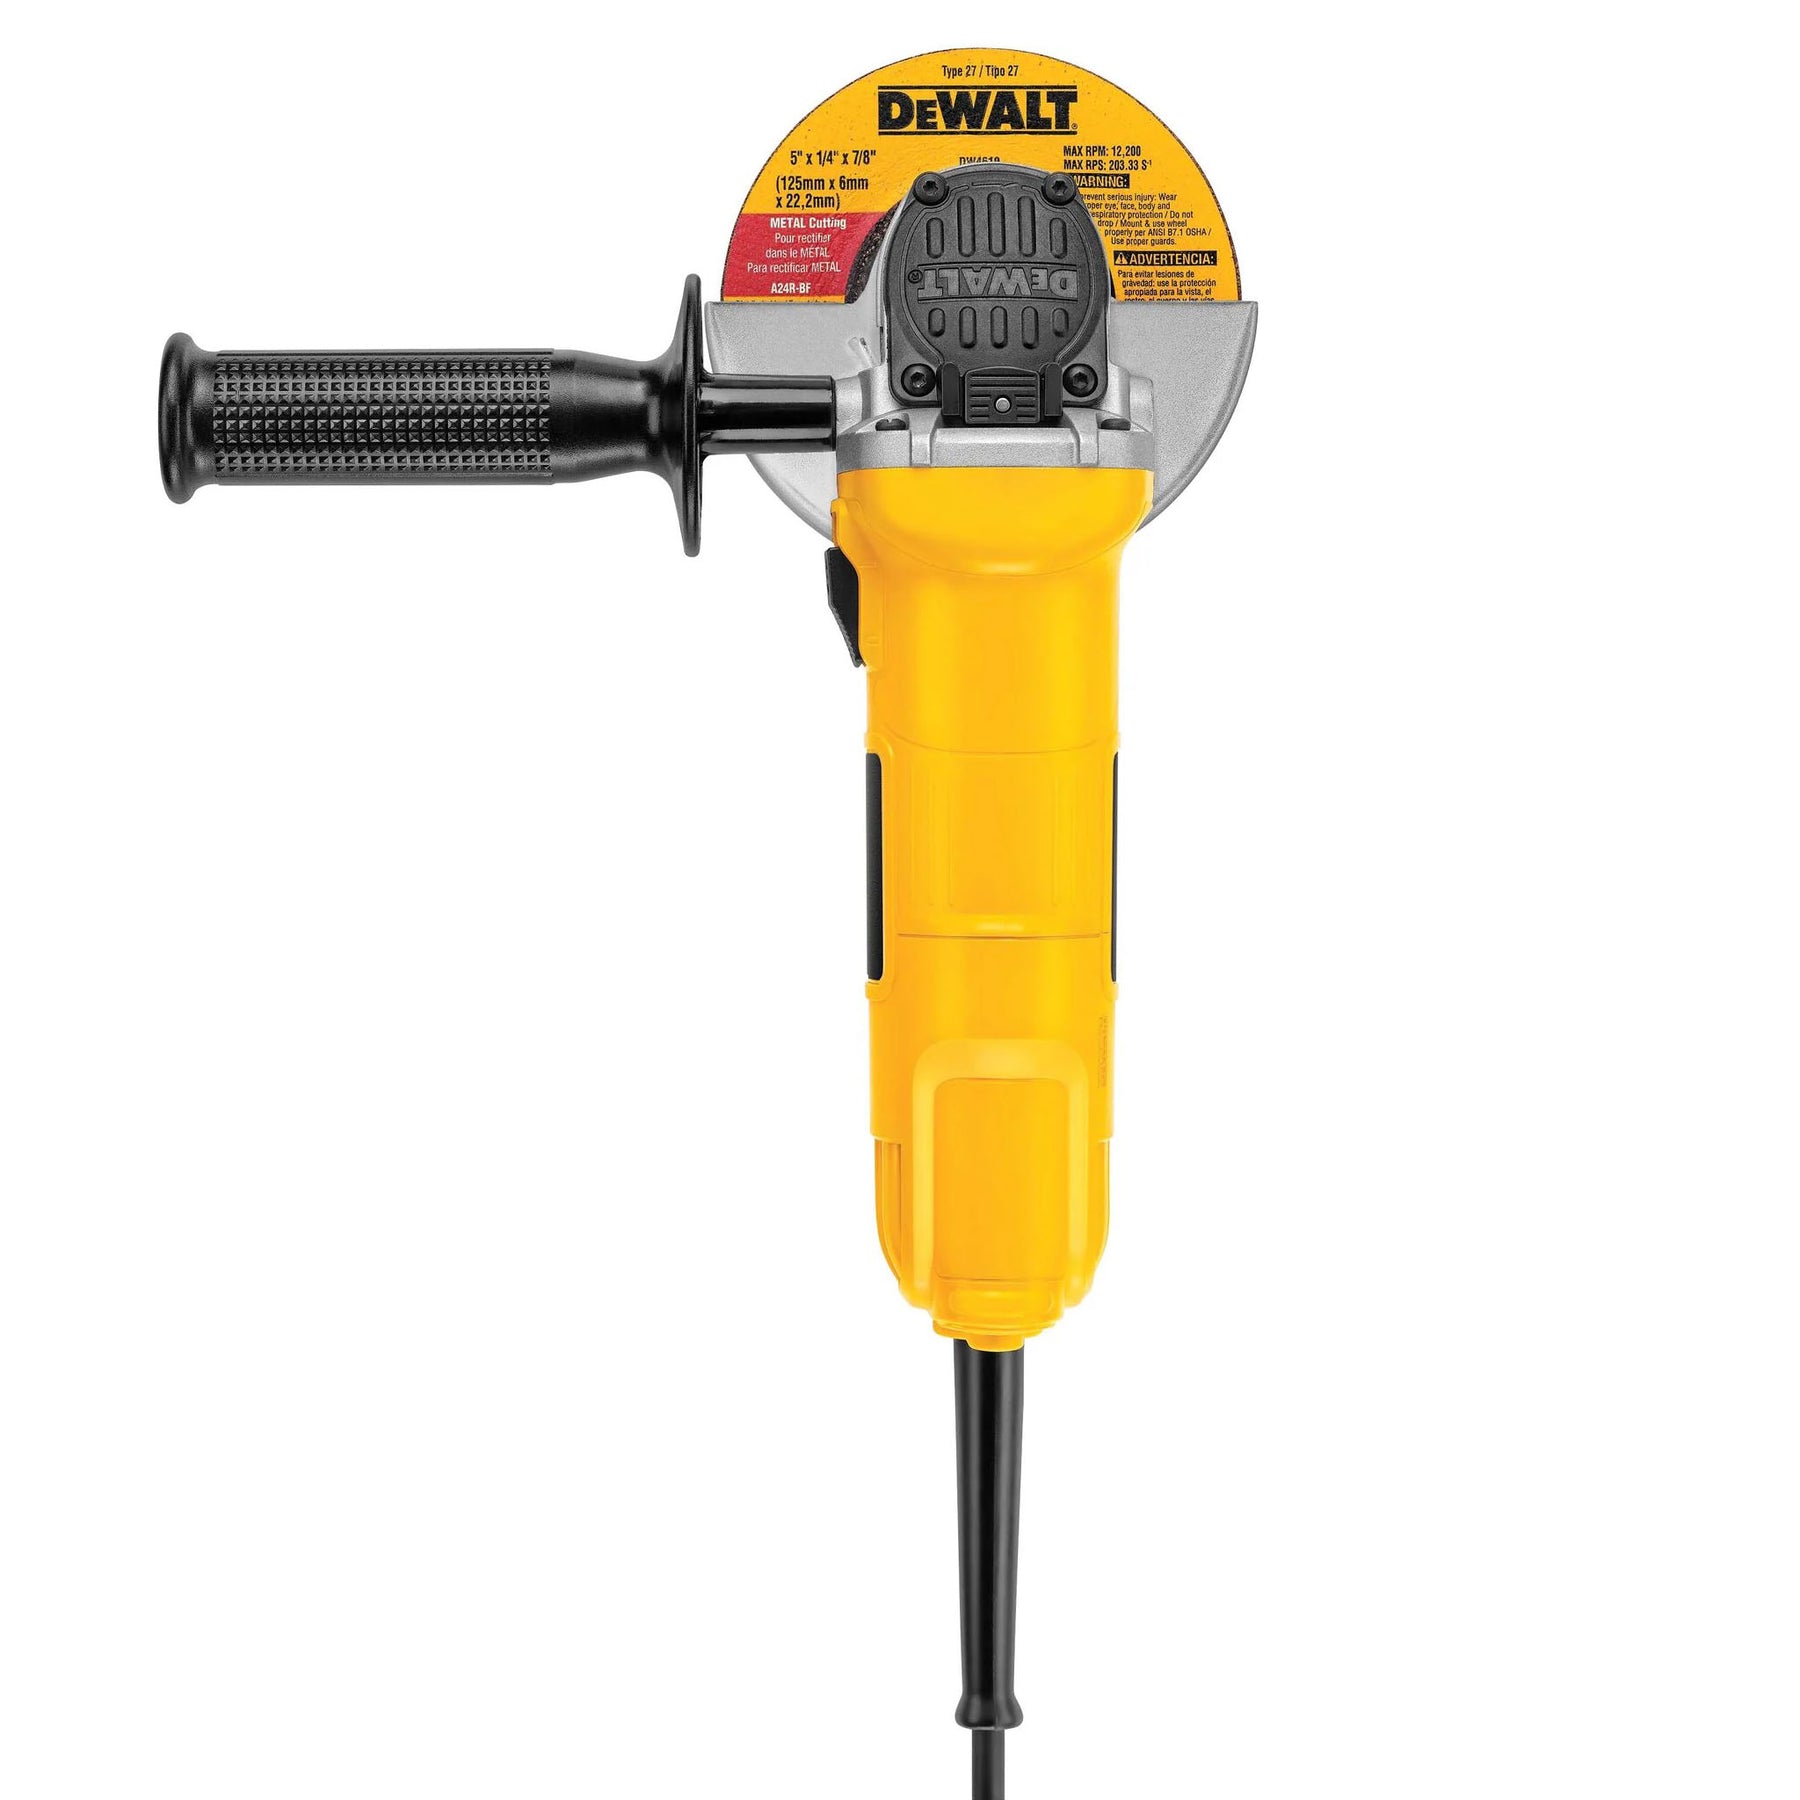 DEWALT 4-1/2" Small Angle Grinder With One-Touch Guard DWE4011